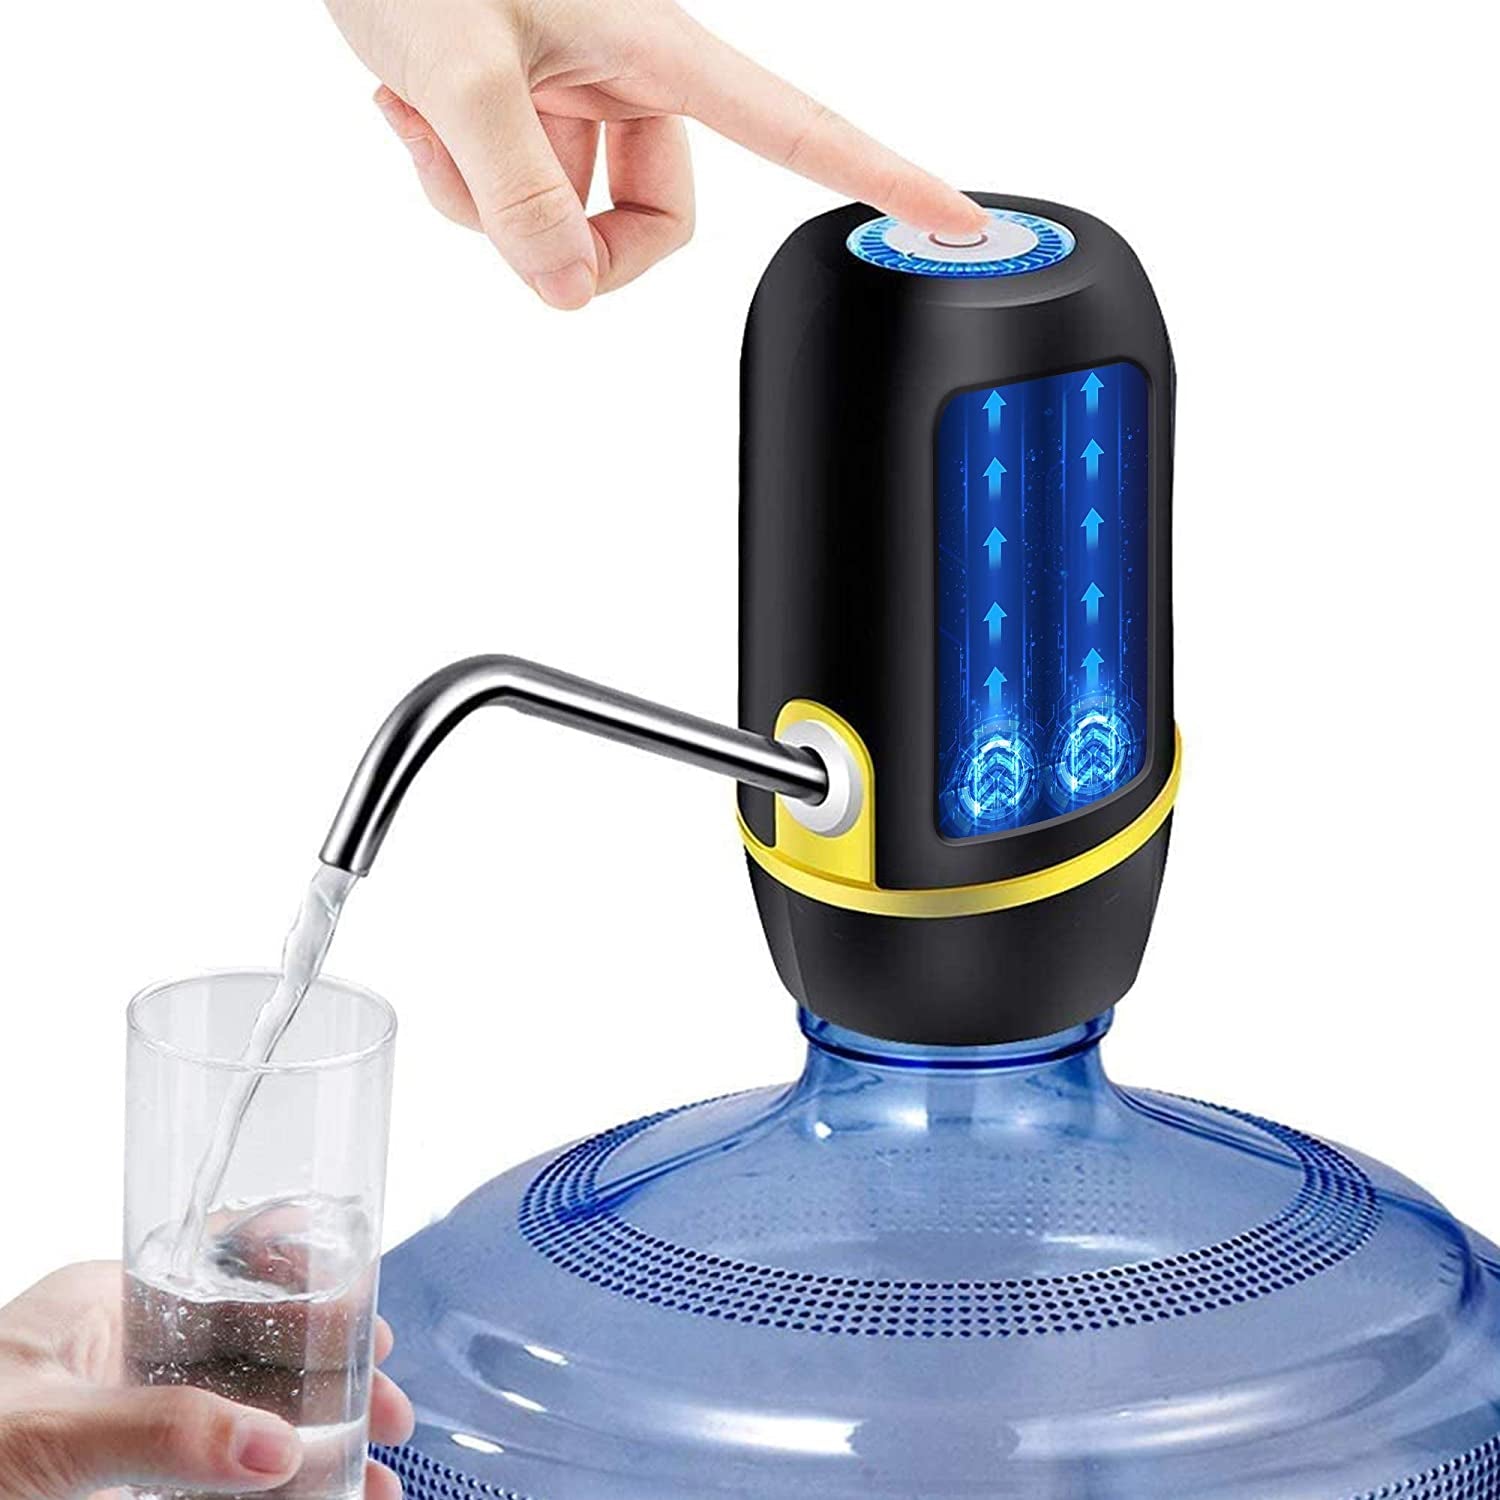 "HydroPump: Convenient Electric Water Jug Pump for Effortless, On-the-Go Drinking Water Dispensing from ３－5 Gallon Bottles – Ideal for Outdoor Adventures!"